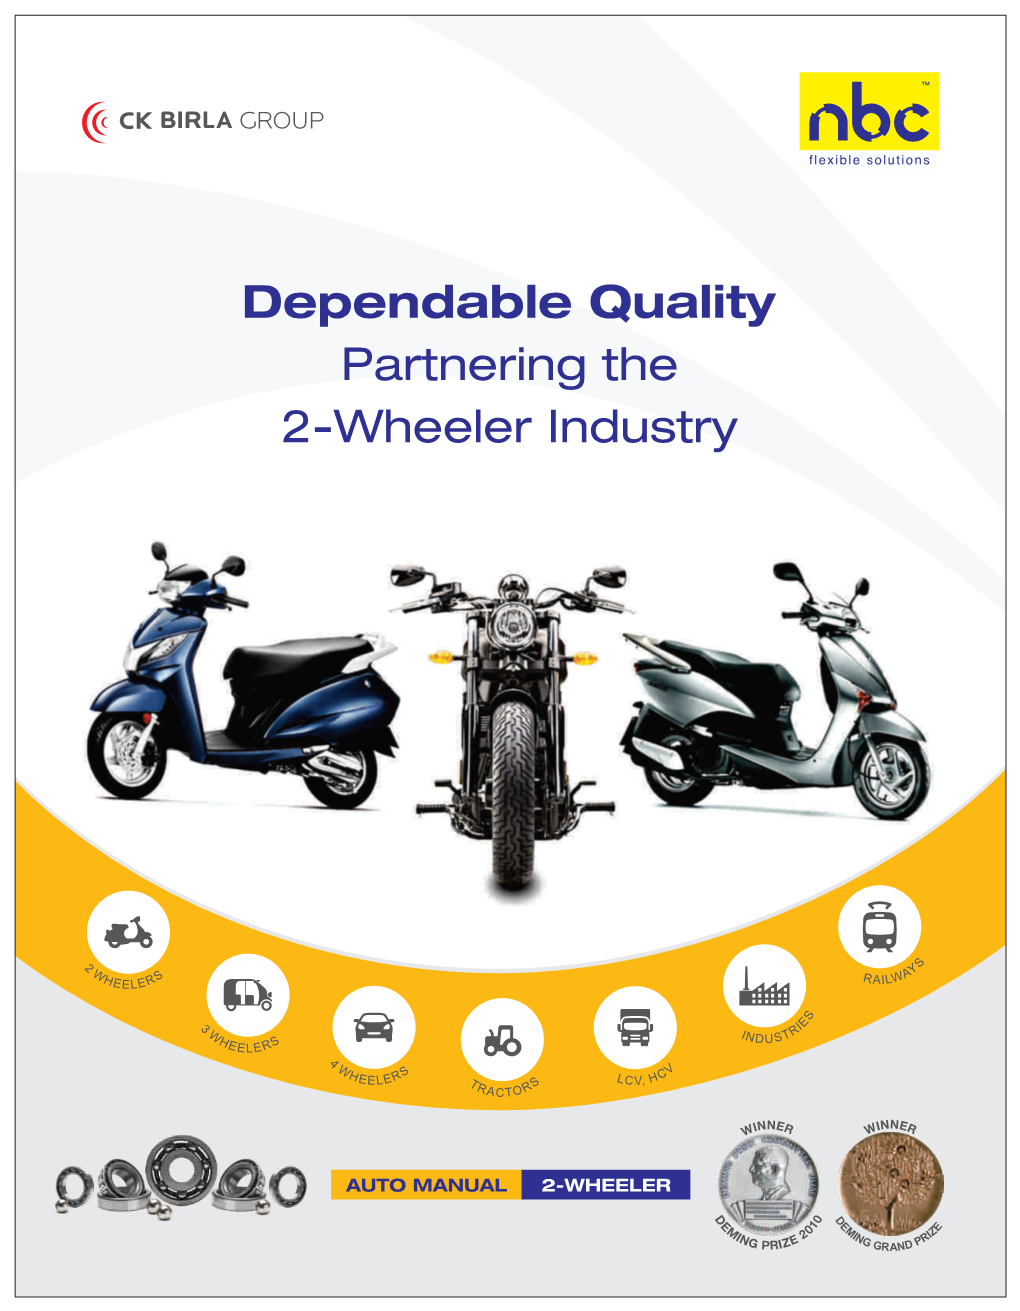 Dependable Quality Partnering the 2-Wheeler Industry